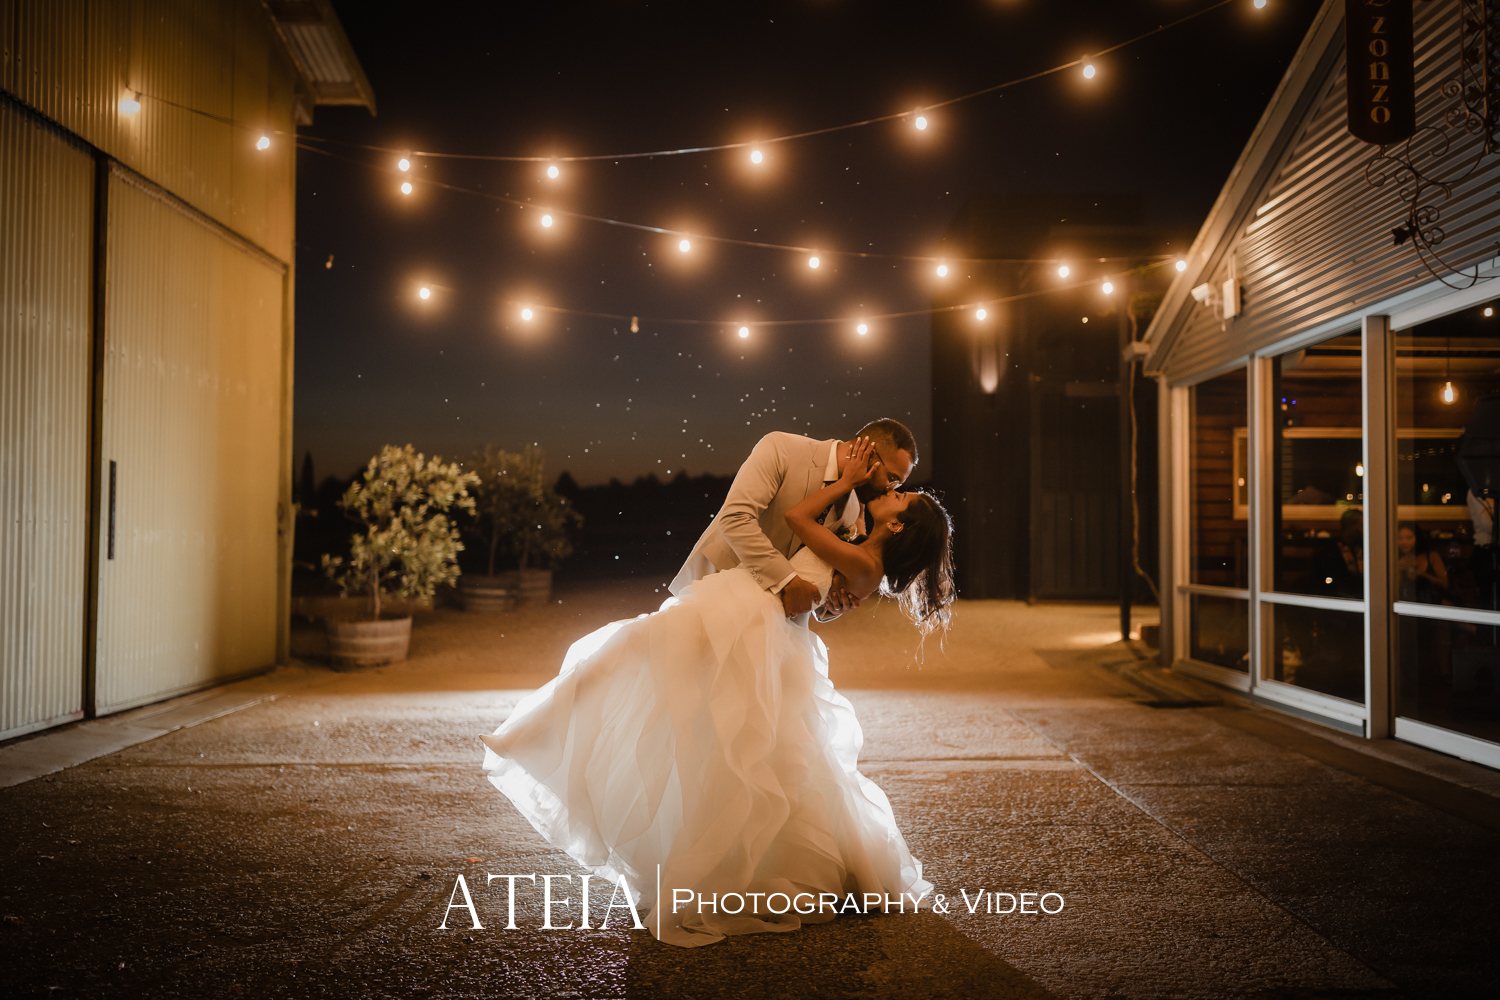 , Nadia and Narayanan&#8217;s wedding photography at Zozno Estate Yarra Valley captured by ATEIA Photography &#038; Video